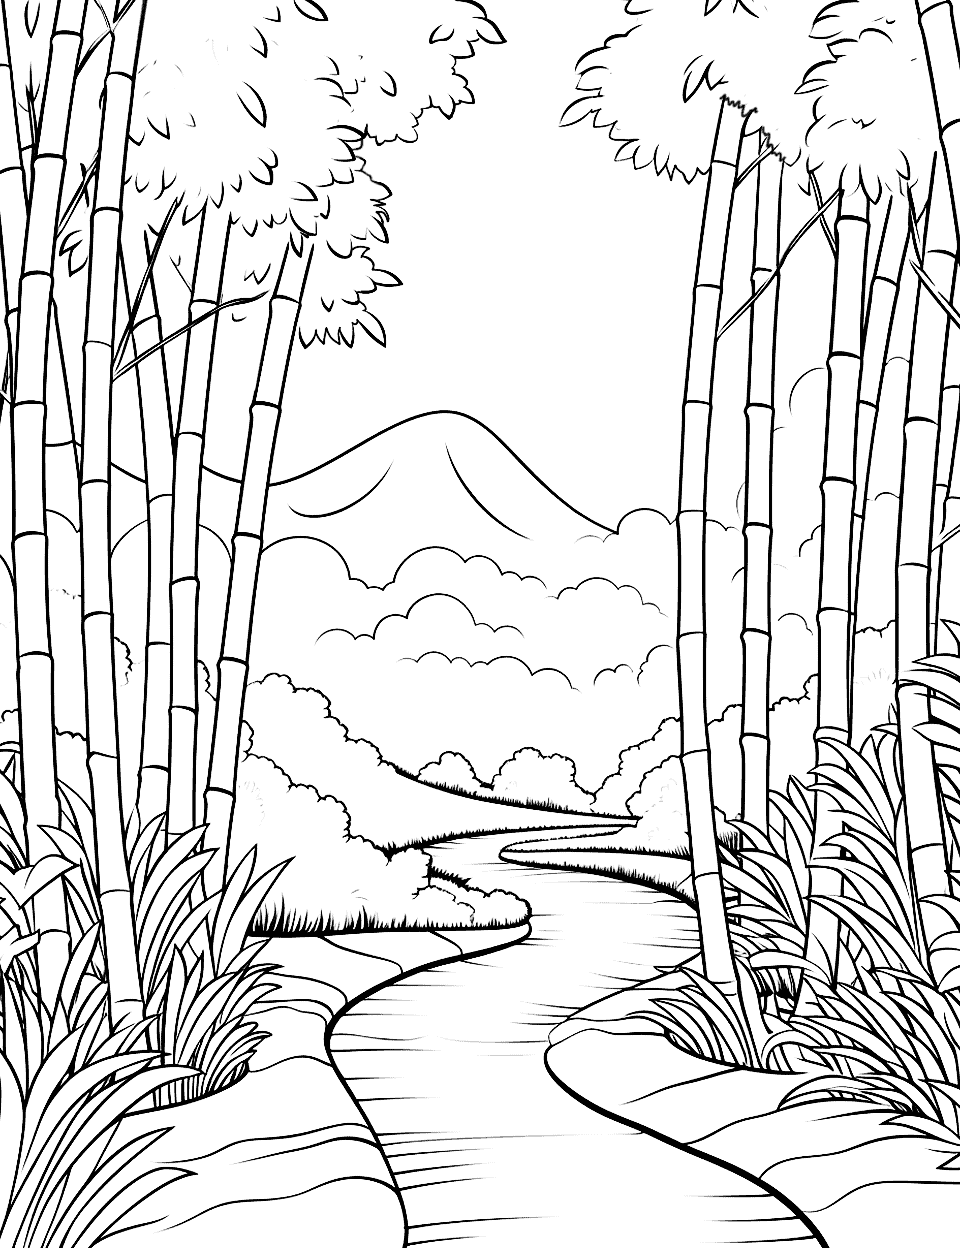 Bamboo Forest Path Coloring Page - A path winding through a dense bamboo forest.